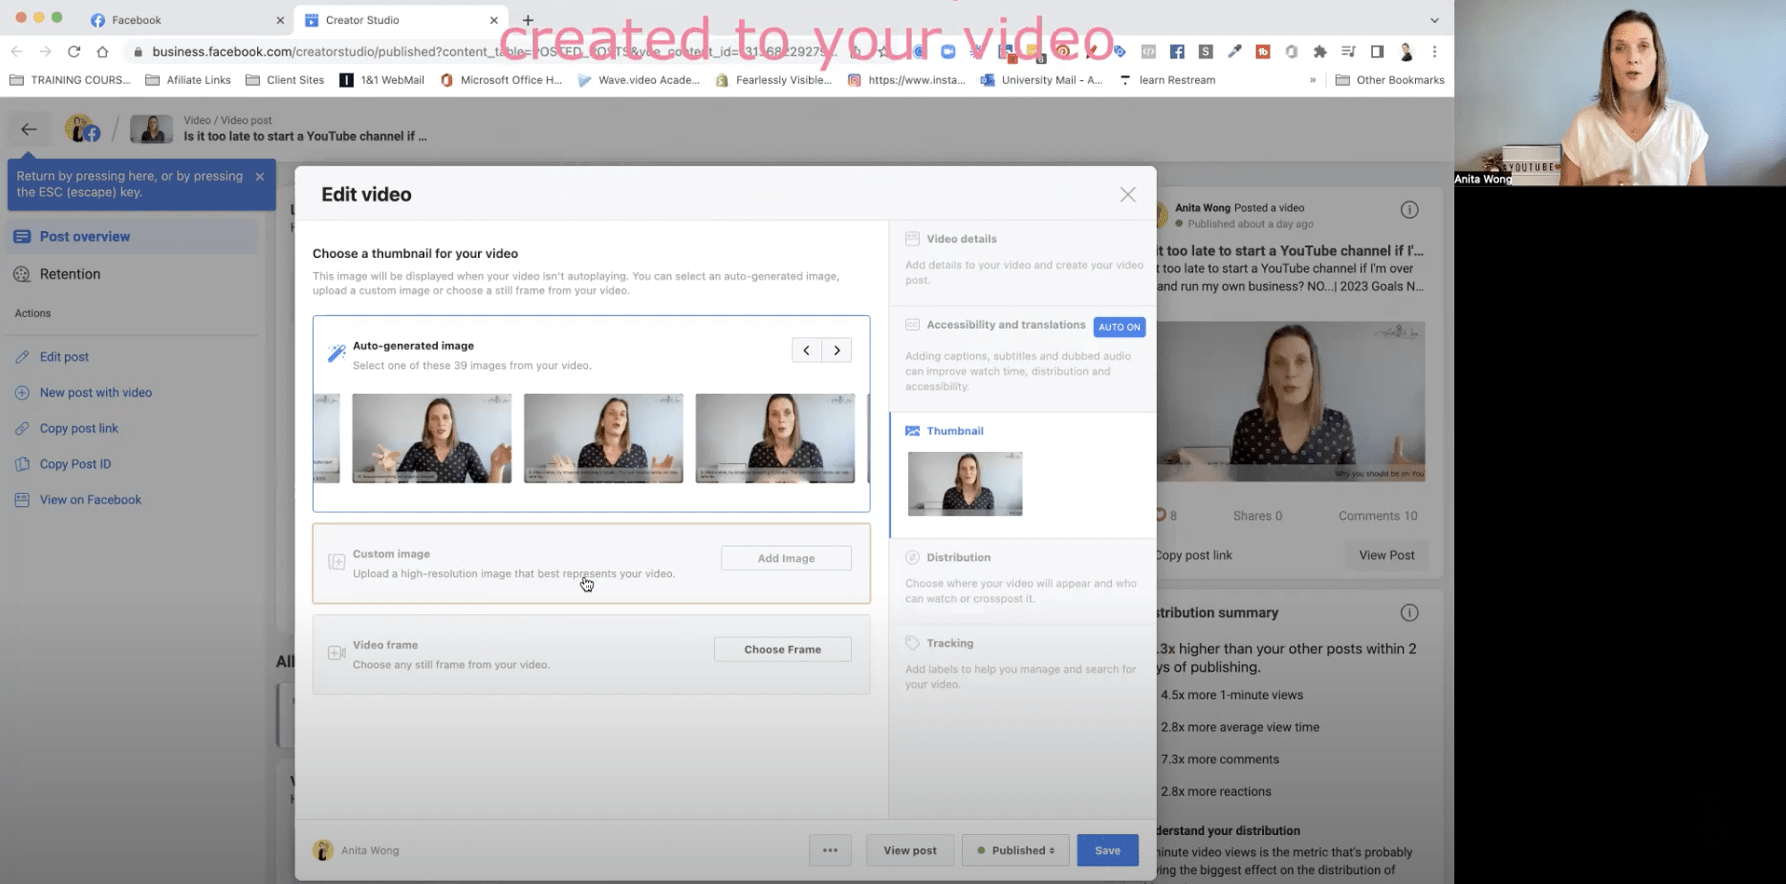 How to upload your own video thumbnail to Facebook